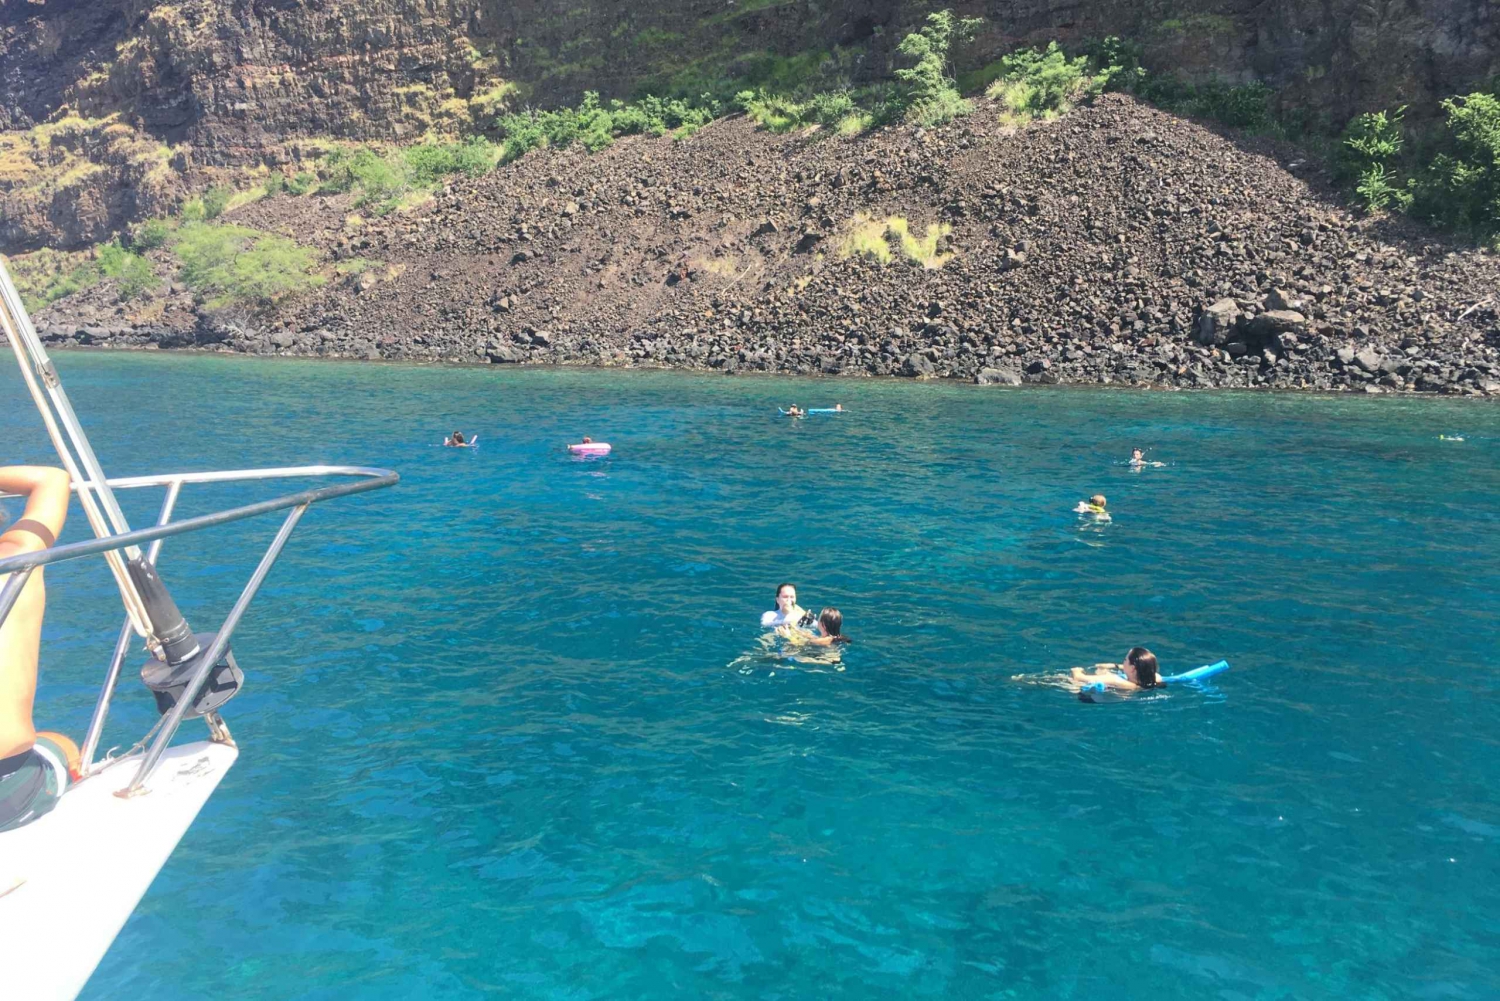 From Keauhou Bay: Snorkel Cruise to Captain Cook's Monument